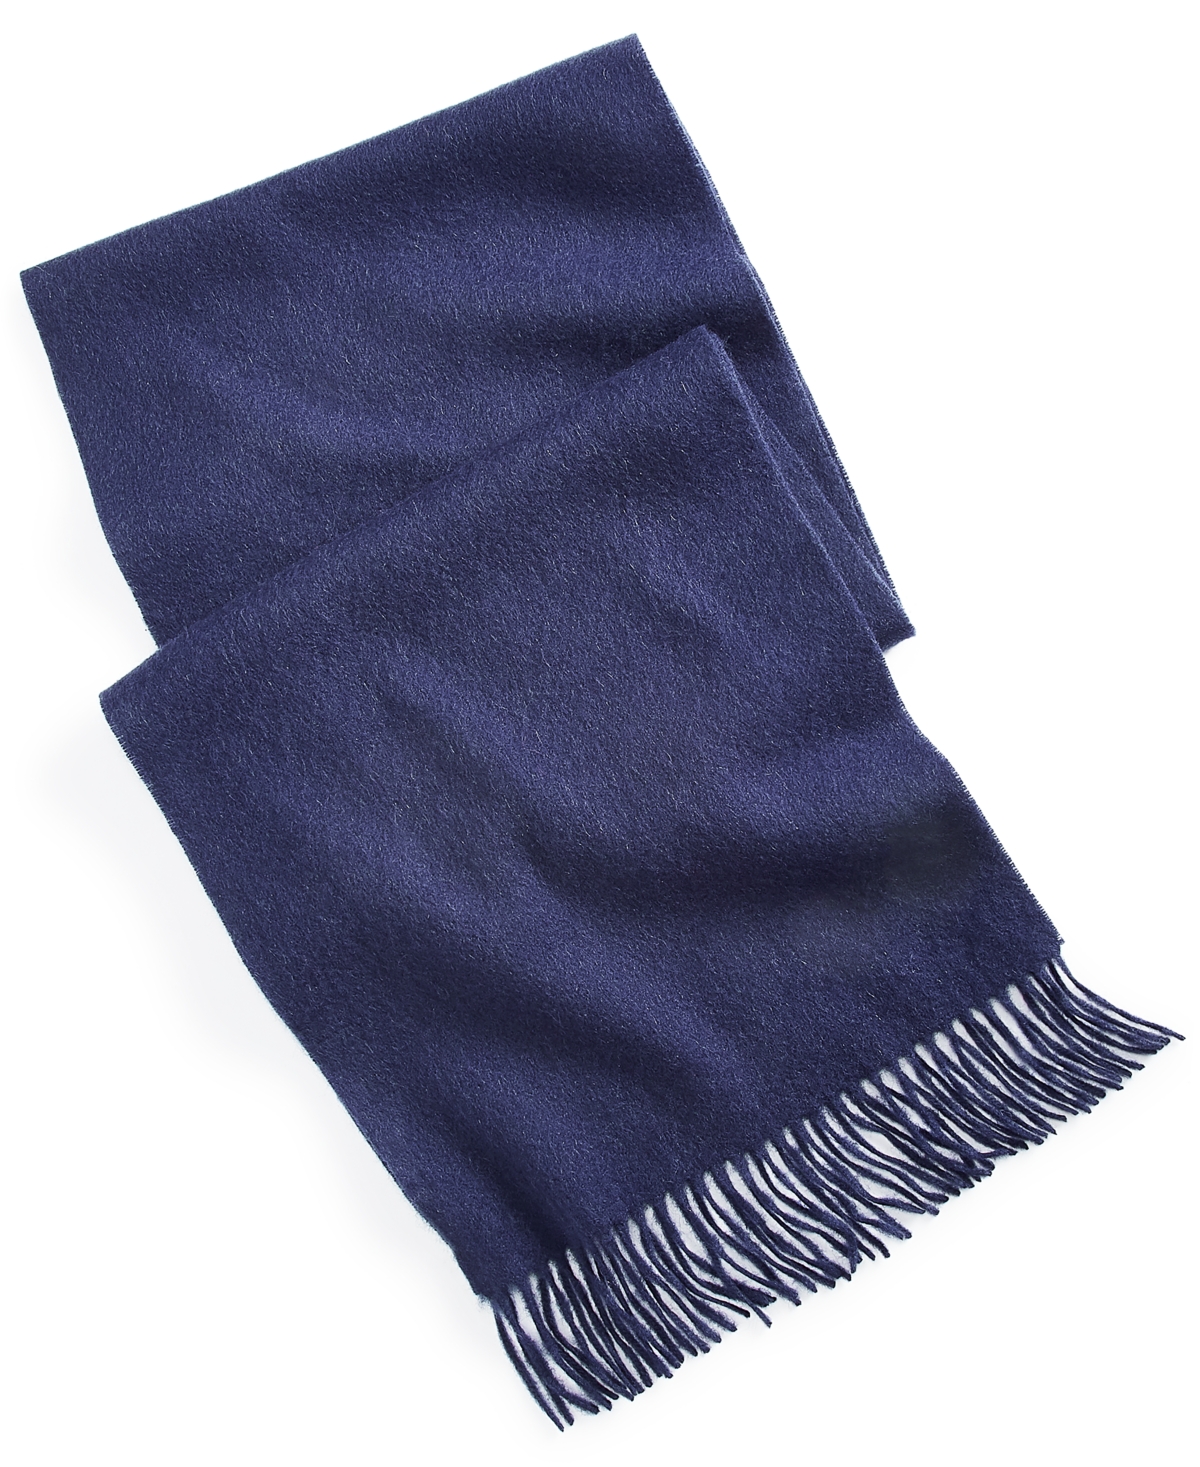 Men's 100% Cashmere Scarf, Created for Macy's - Tan